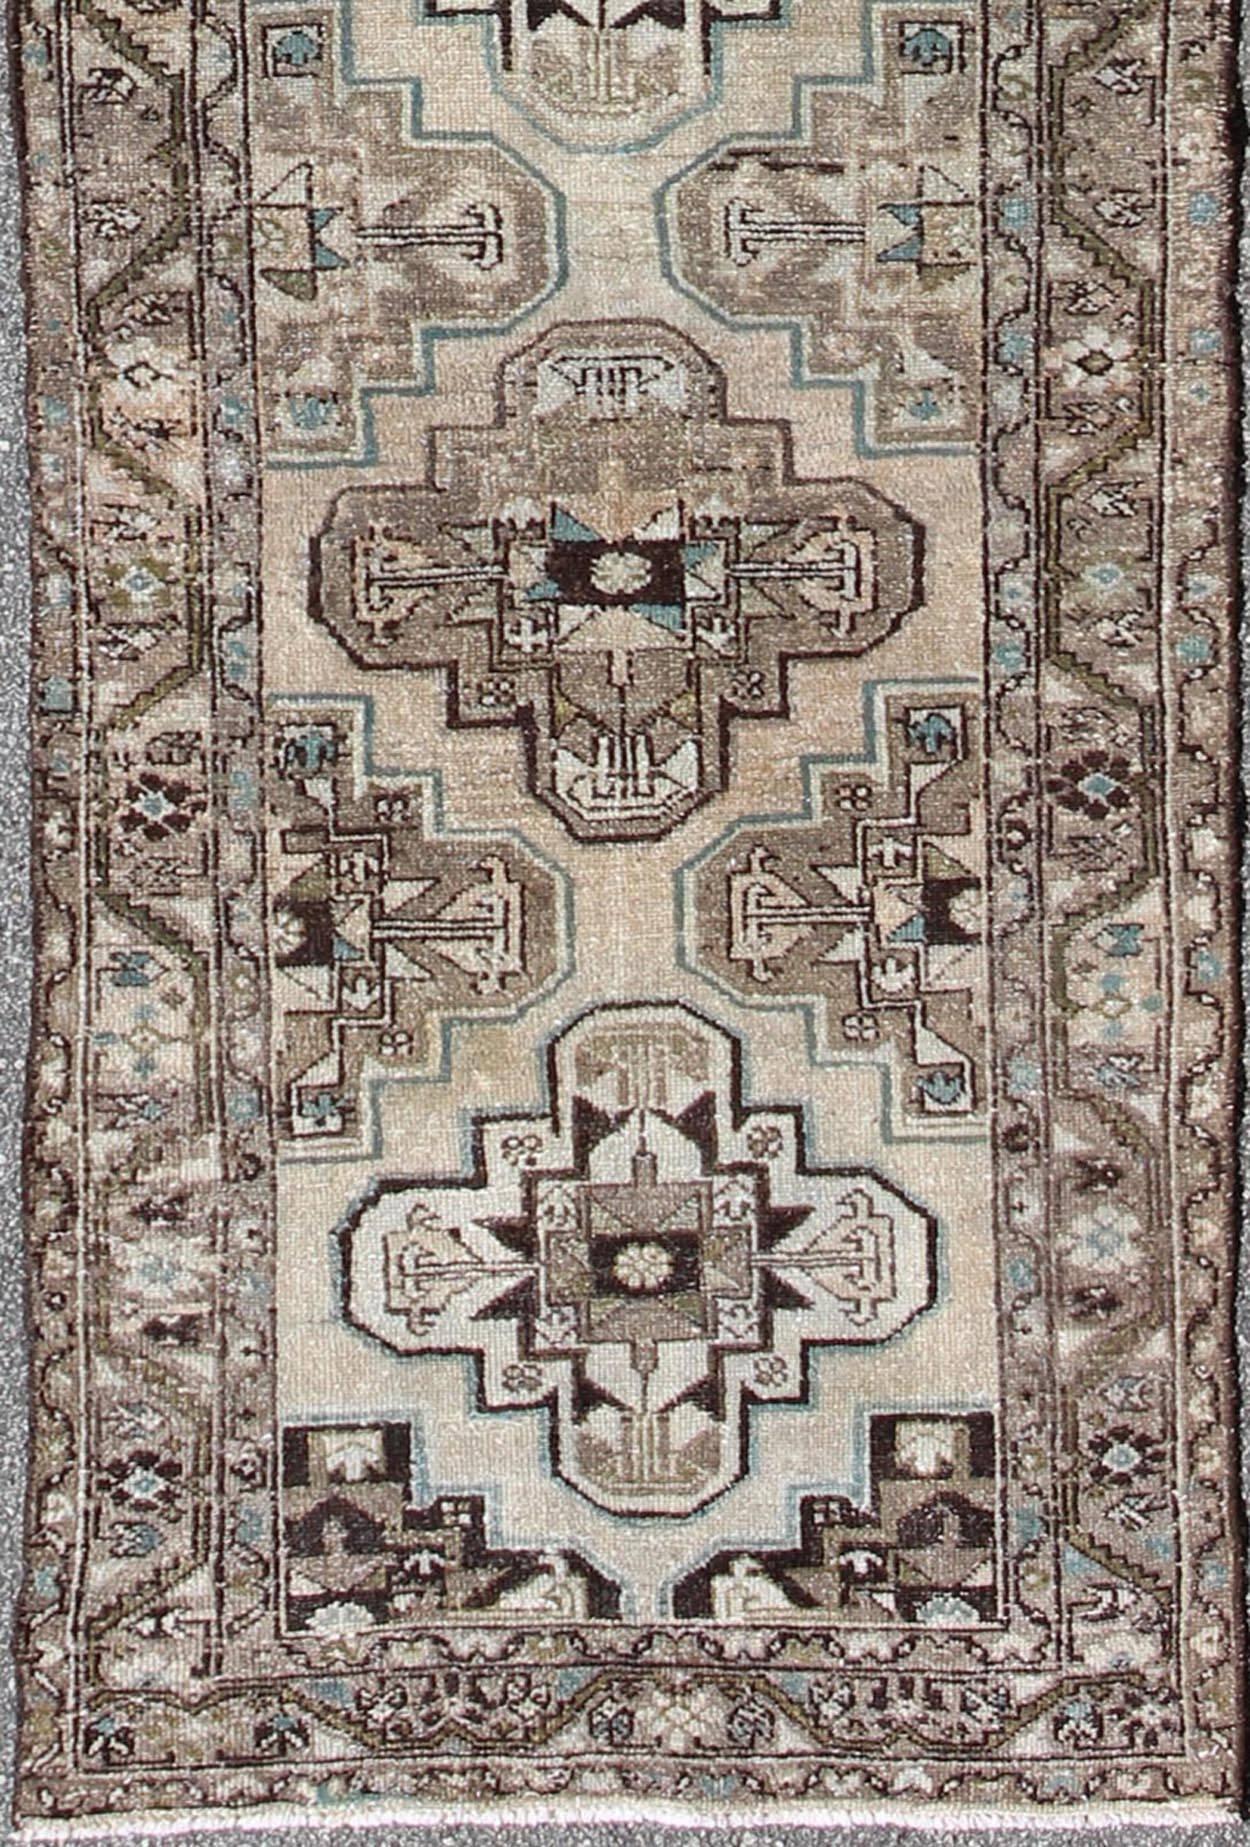 Antique Persian Hamadan runner with stacked medallion in taupe, ivory, Black, Brown and blue, rug kbe-h-701-11, country of origin / type: Iran / Hamadan, circa 1900

This antique Persian Hamadan long runner from early 20th century Iran features a